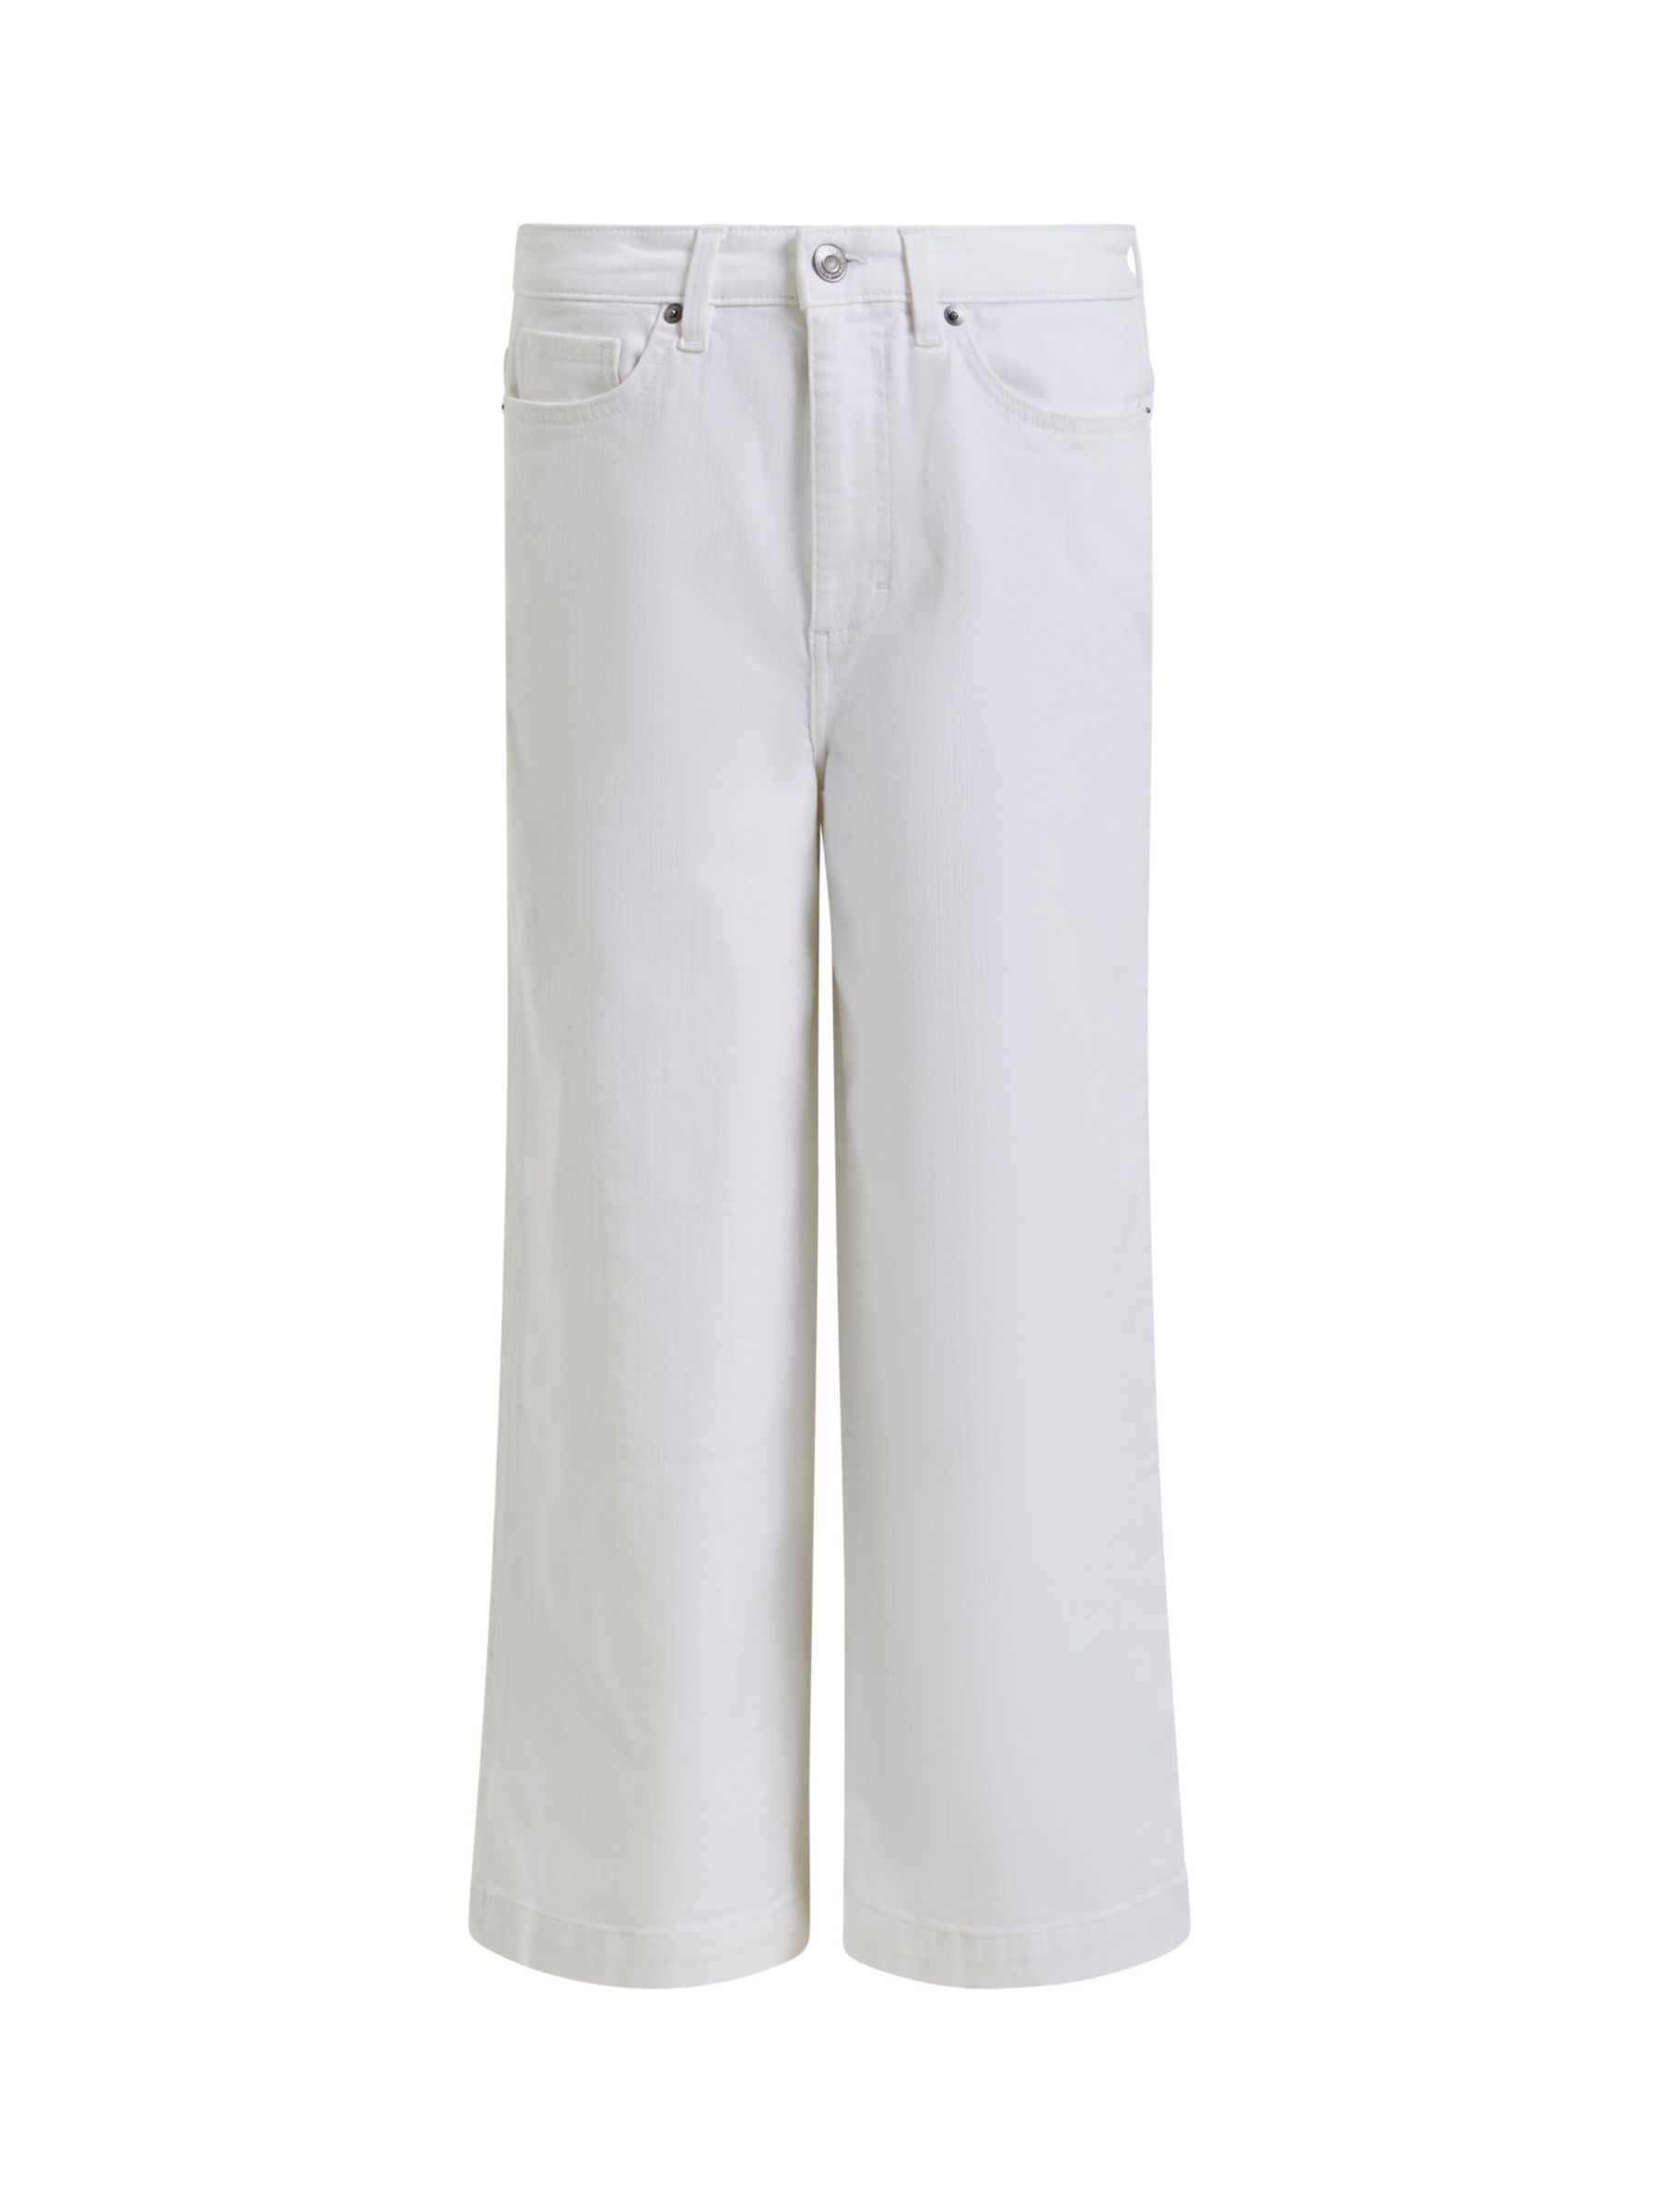 French Connection Conscious Stretch Culottes, White at John Lewis ...